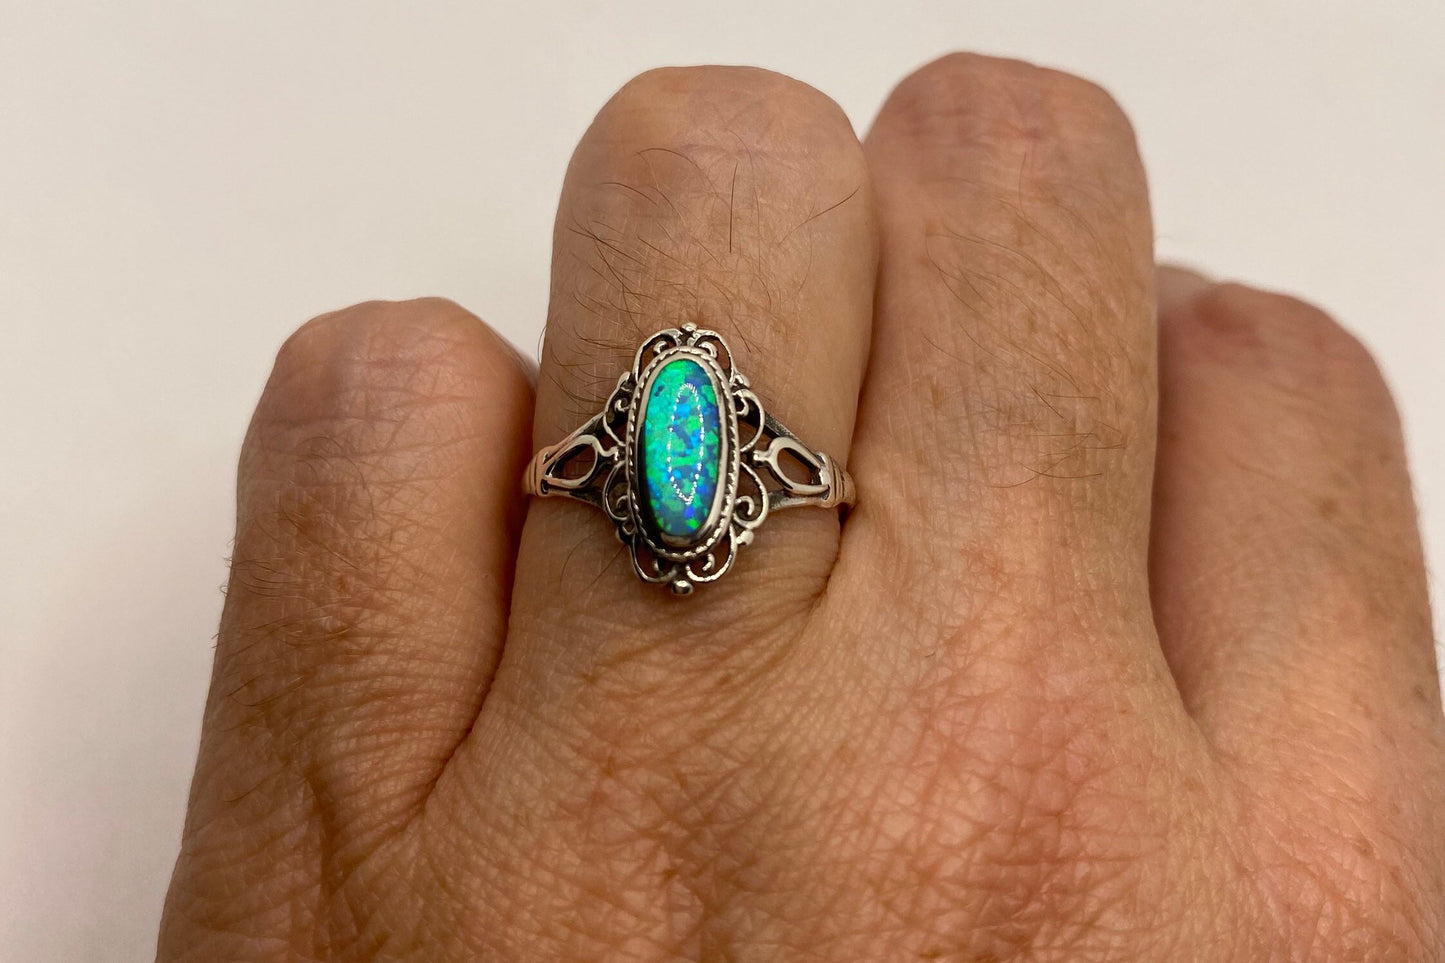 Vintage Blue Fire Opal 925 Sterling Silver Inlay Ring